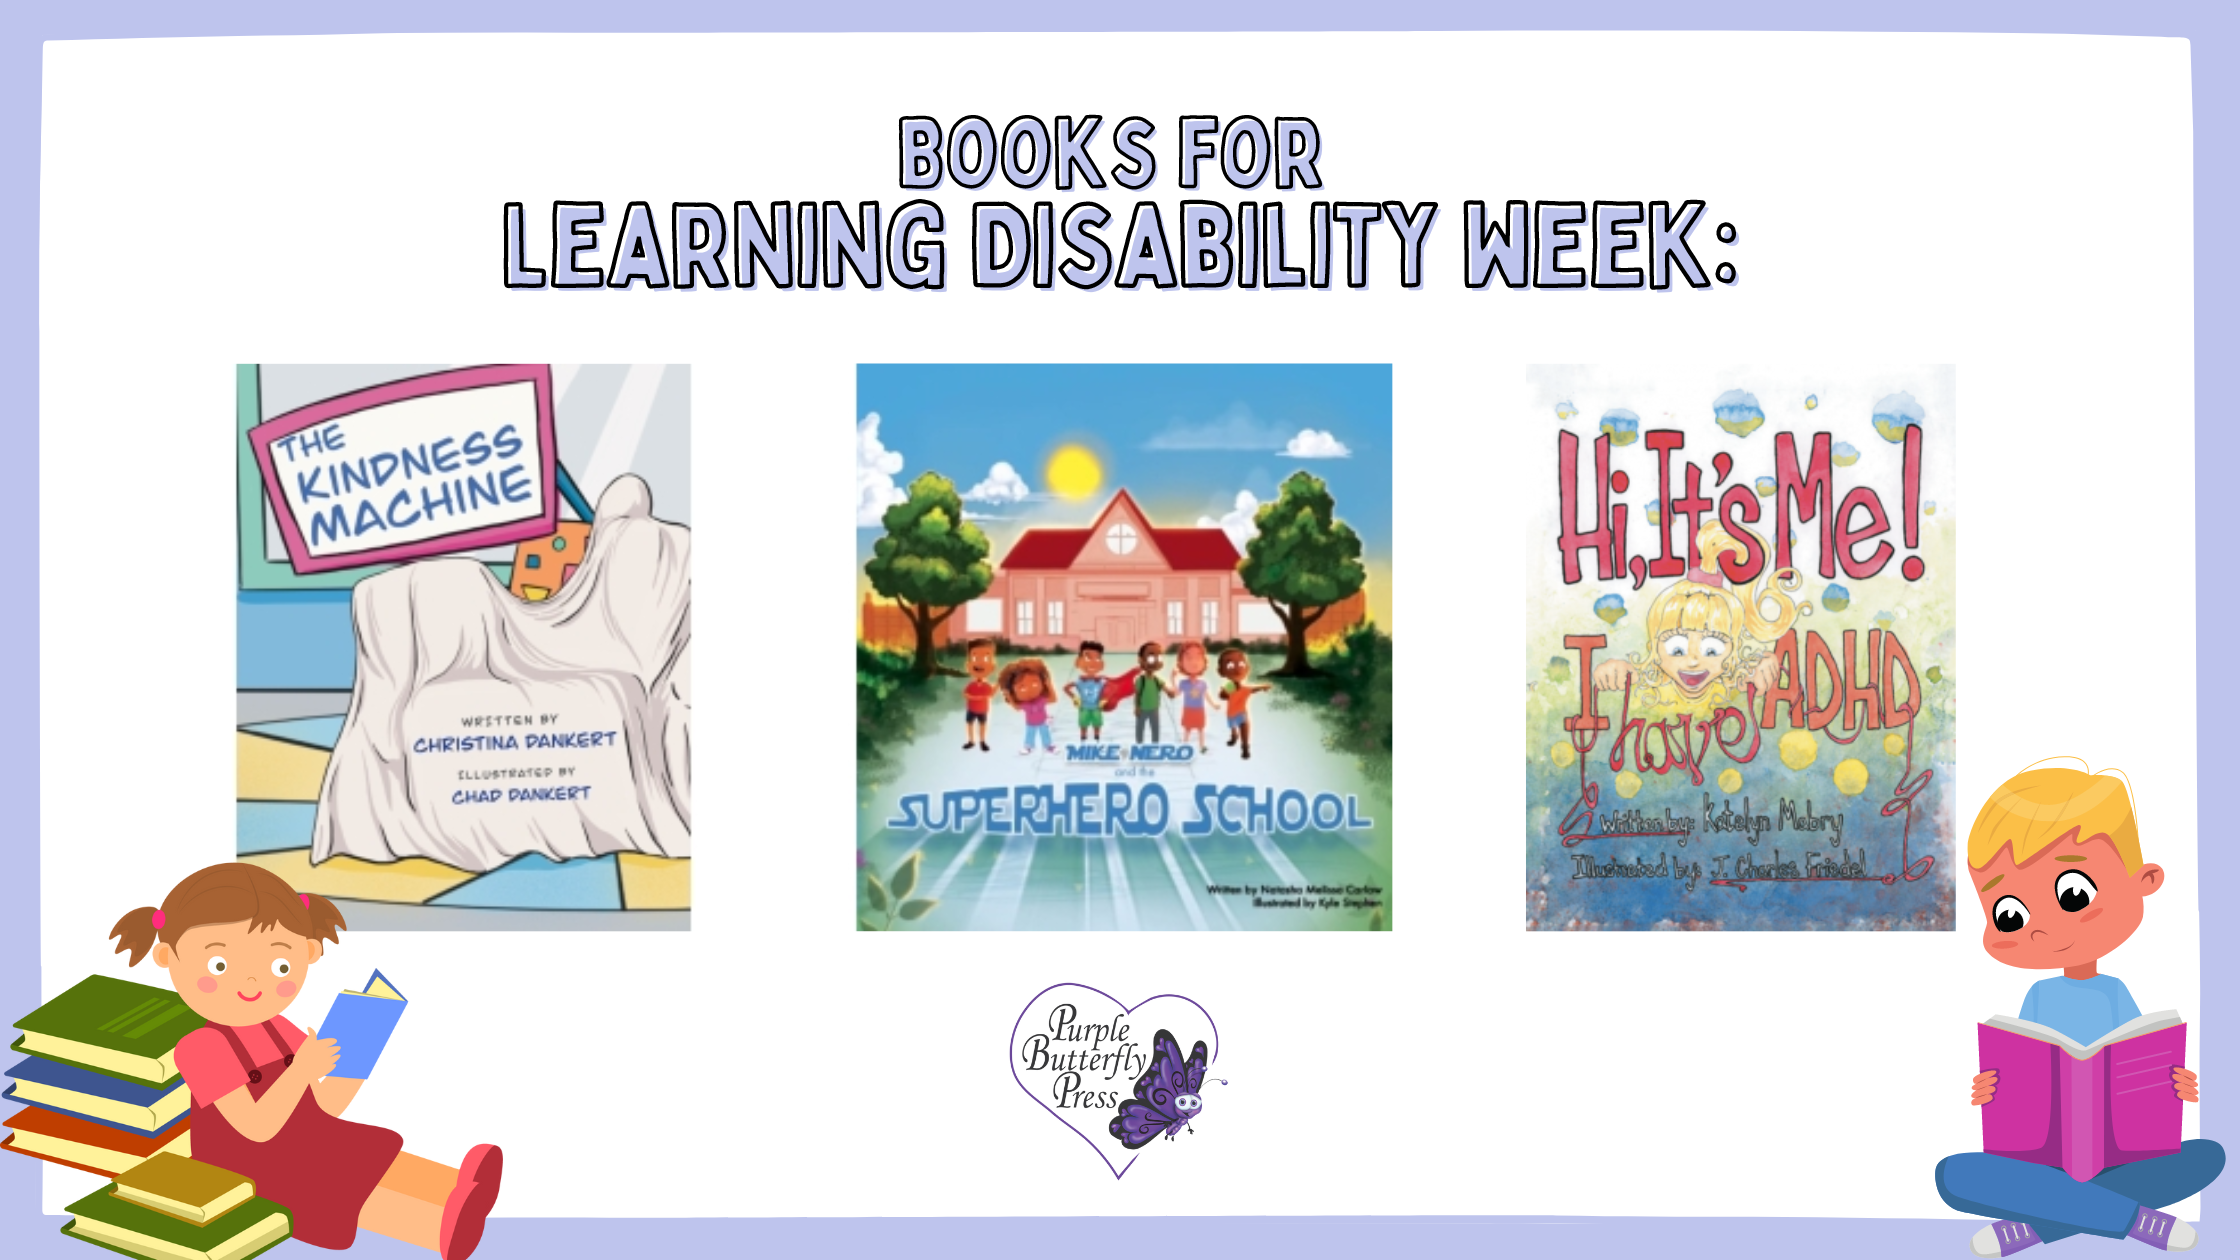 Inclusion books for learning disability week